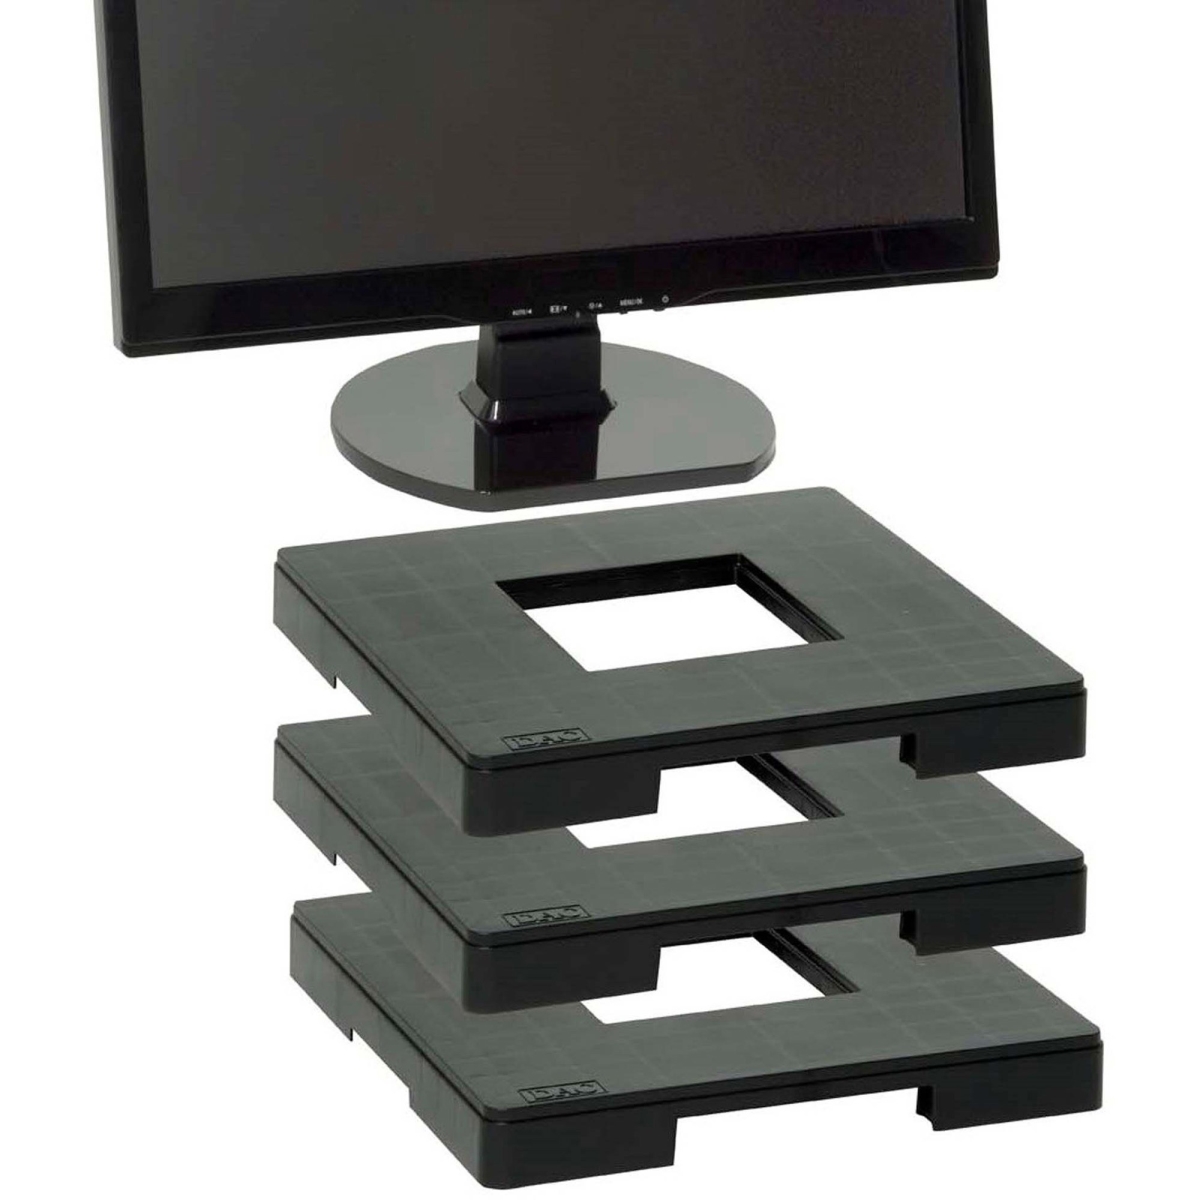 Picture of DAC DTA02151 1.25 in. Standard Monitor Riser Block for Flat Panel Display Type Supported, Black